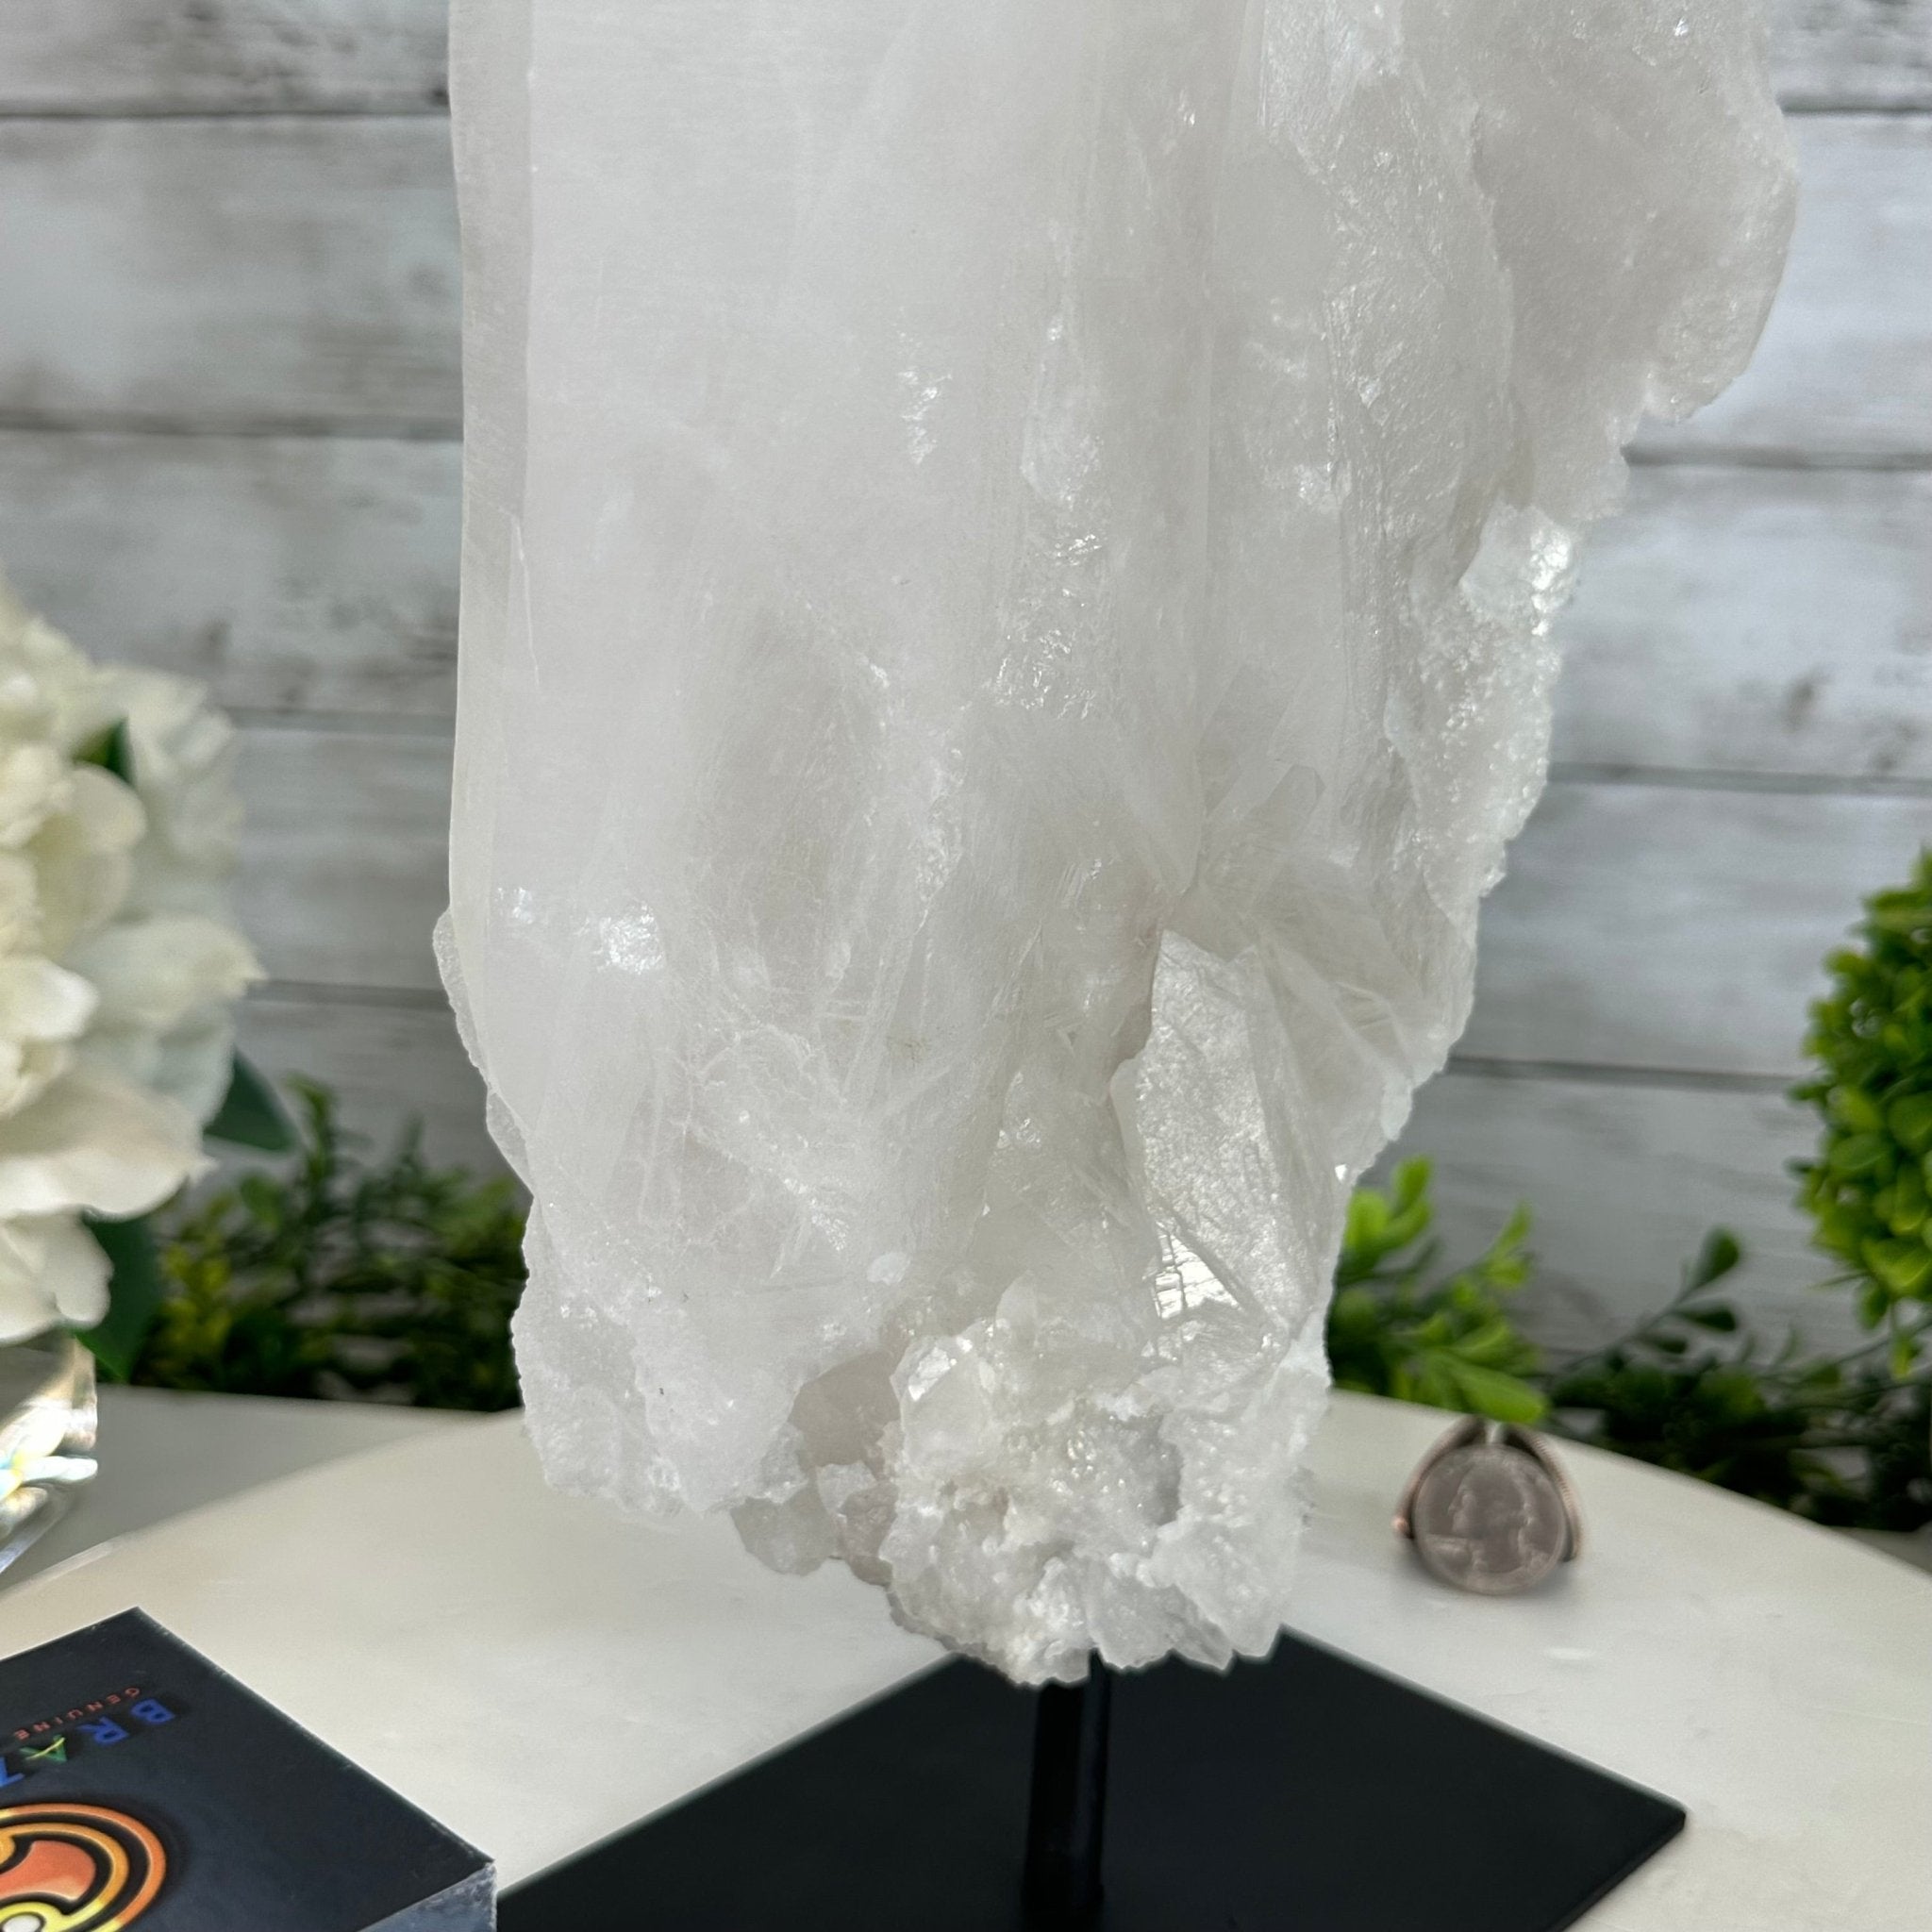 Clear Quartz Crystal Point on Fixed Base, 13.5 lbs & 15.1" Tall #3122CQ-012 - Brazil GemsBrazil GemsClear Quartz Crystal Point on Fixed Base, 13.5 lbs & 15.1" Tall #3122CQ-012Crystal Points3122CQ-012